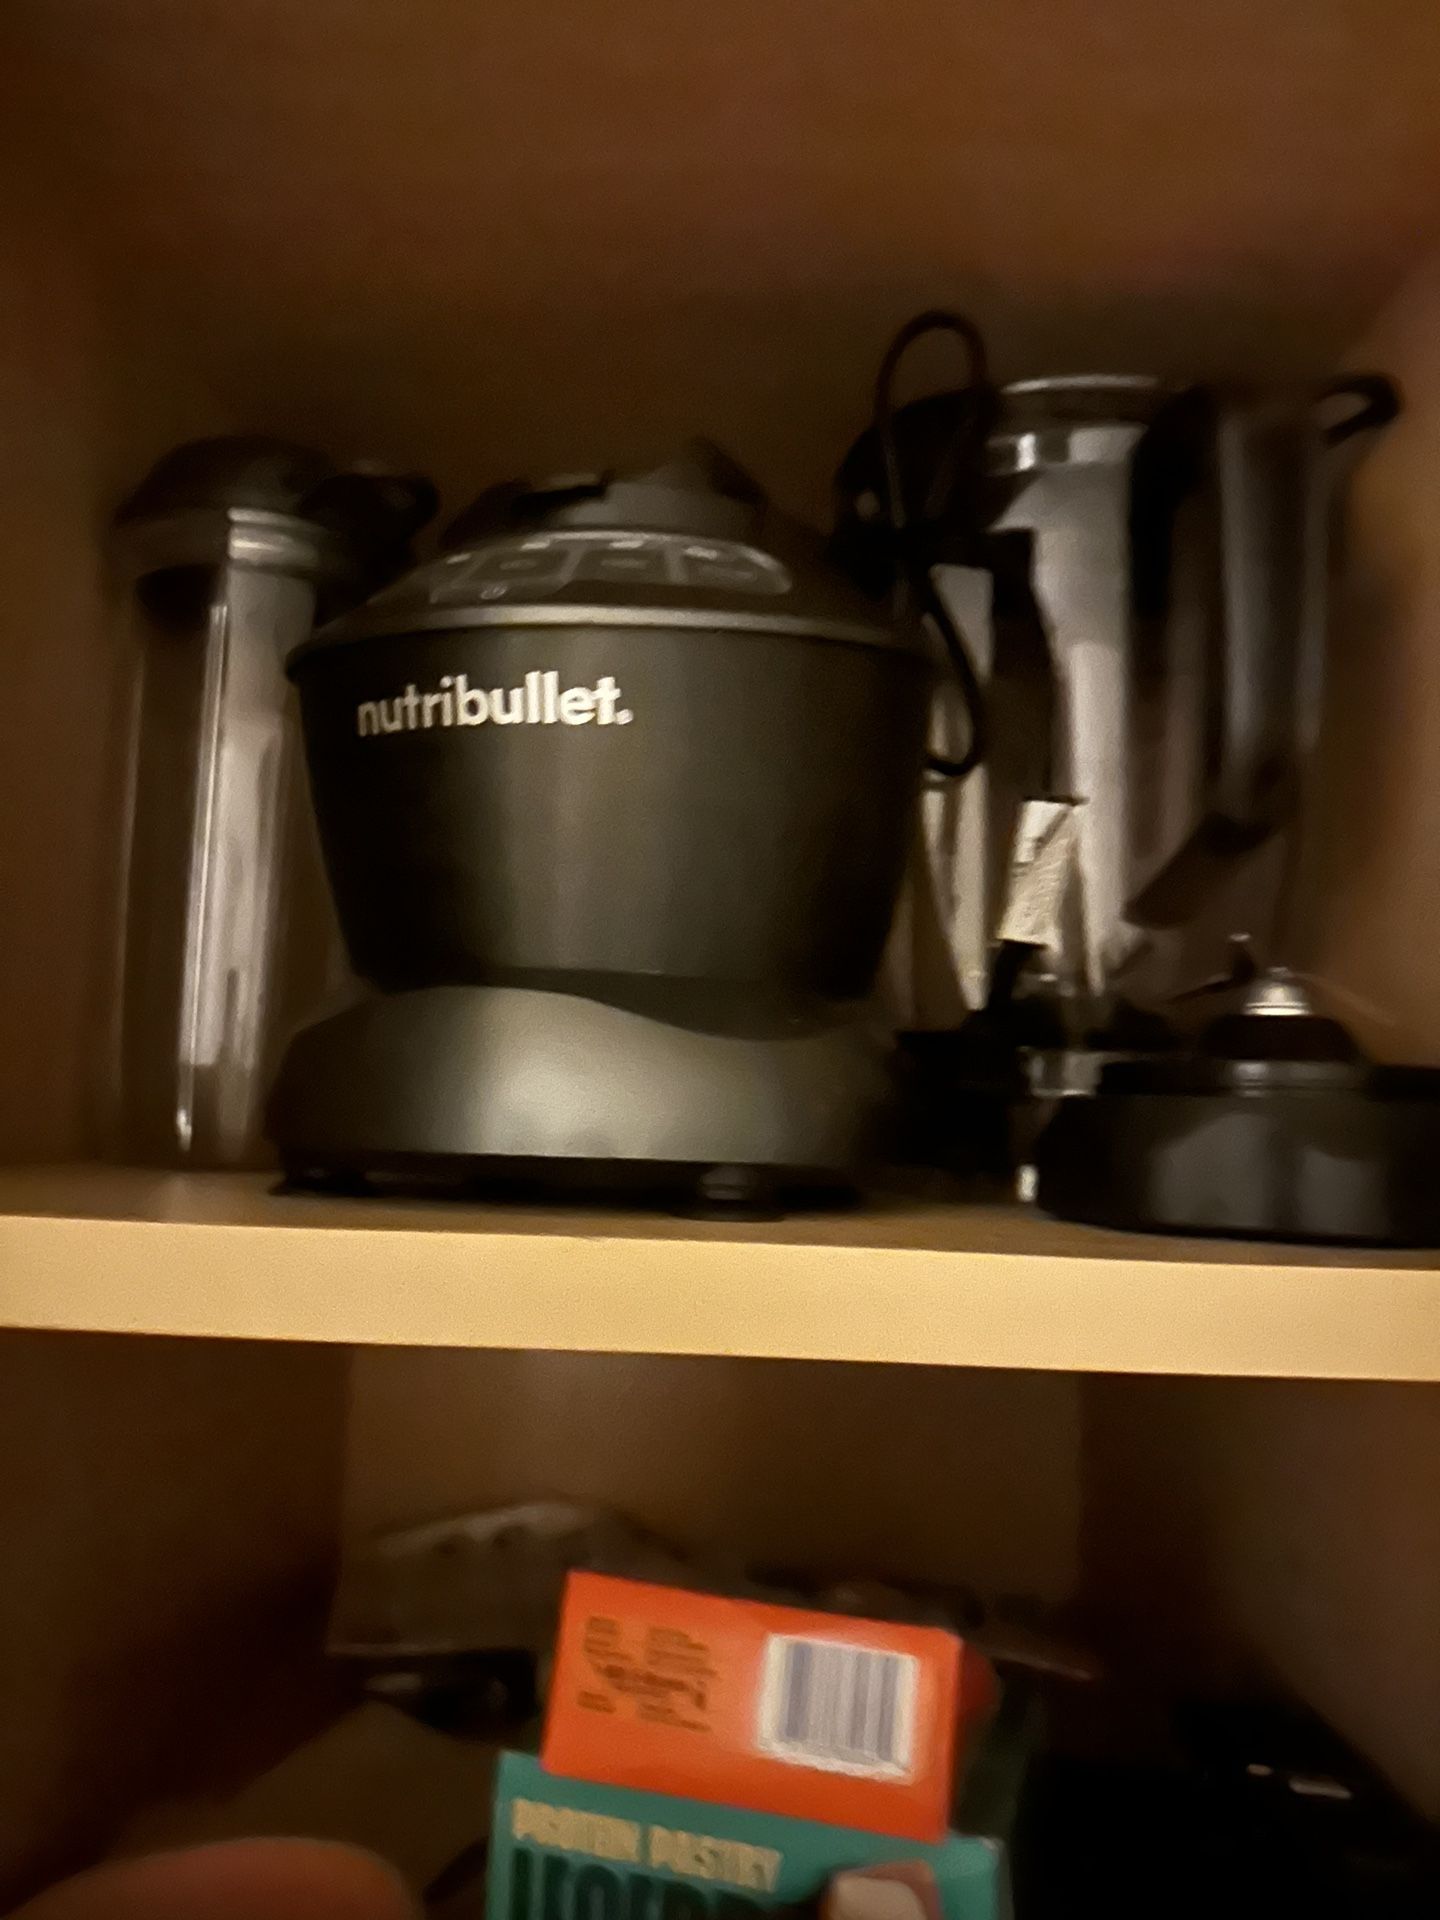 Nutribullet Used With Two Cups